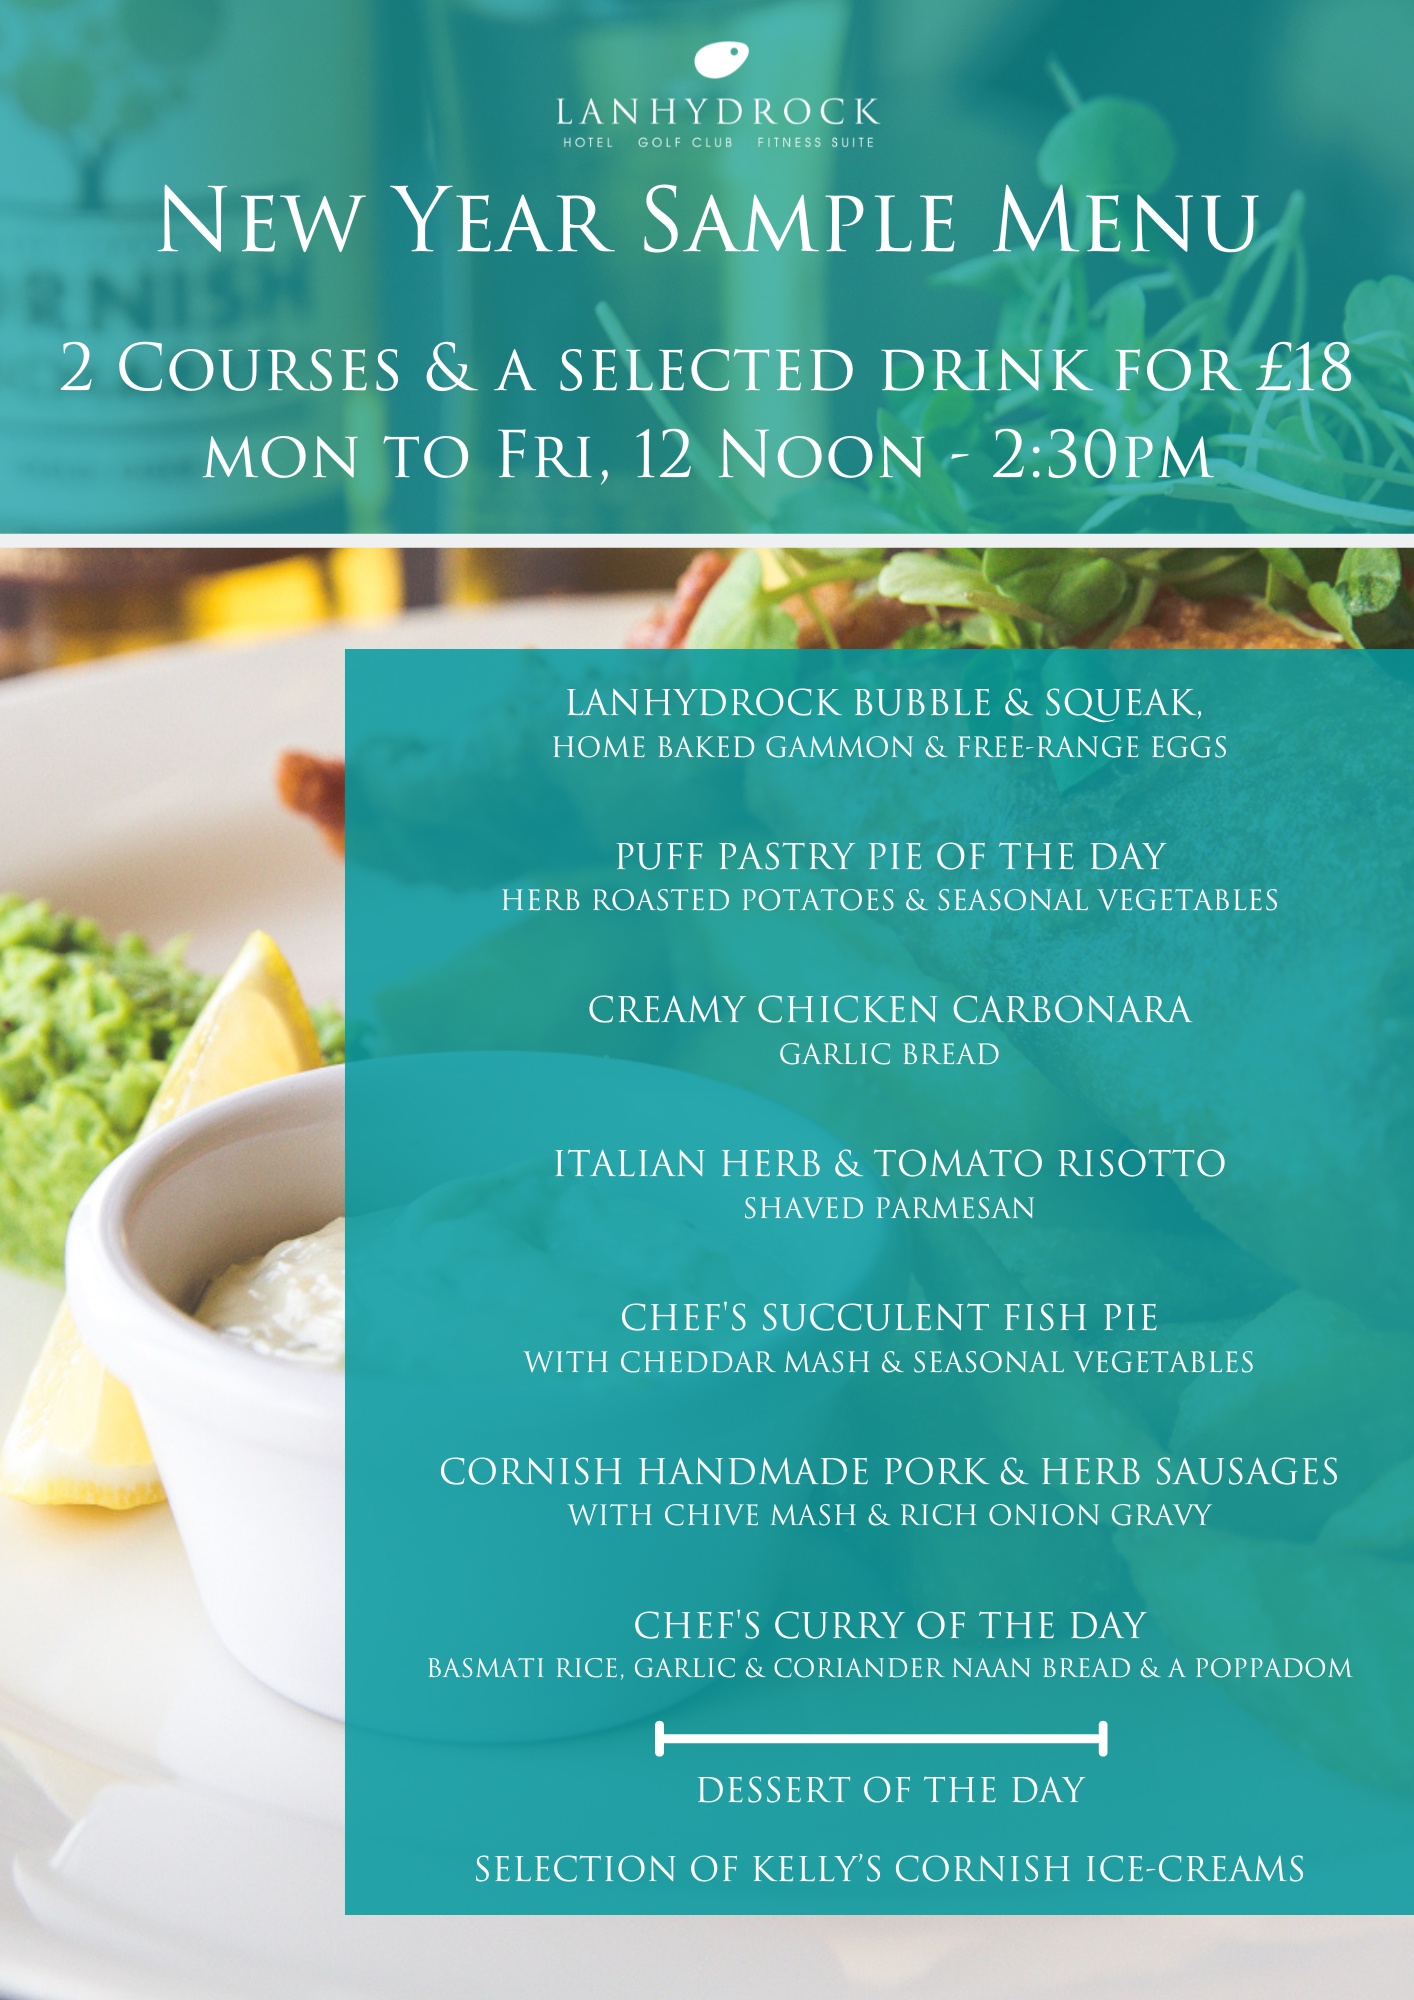 February 2 course meal deal